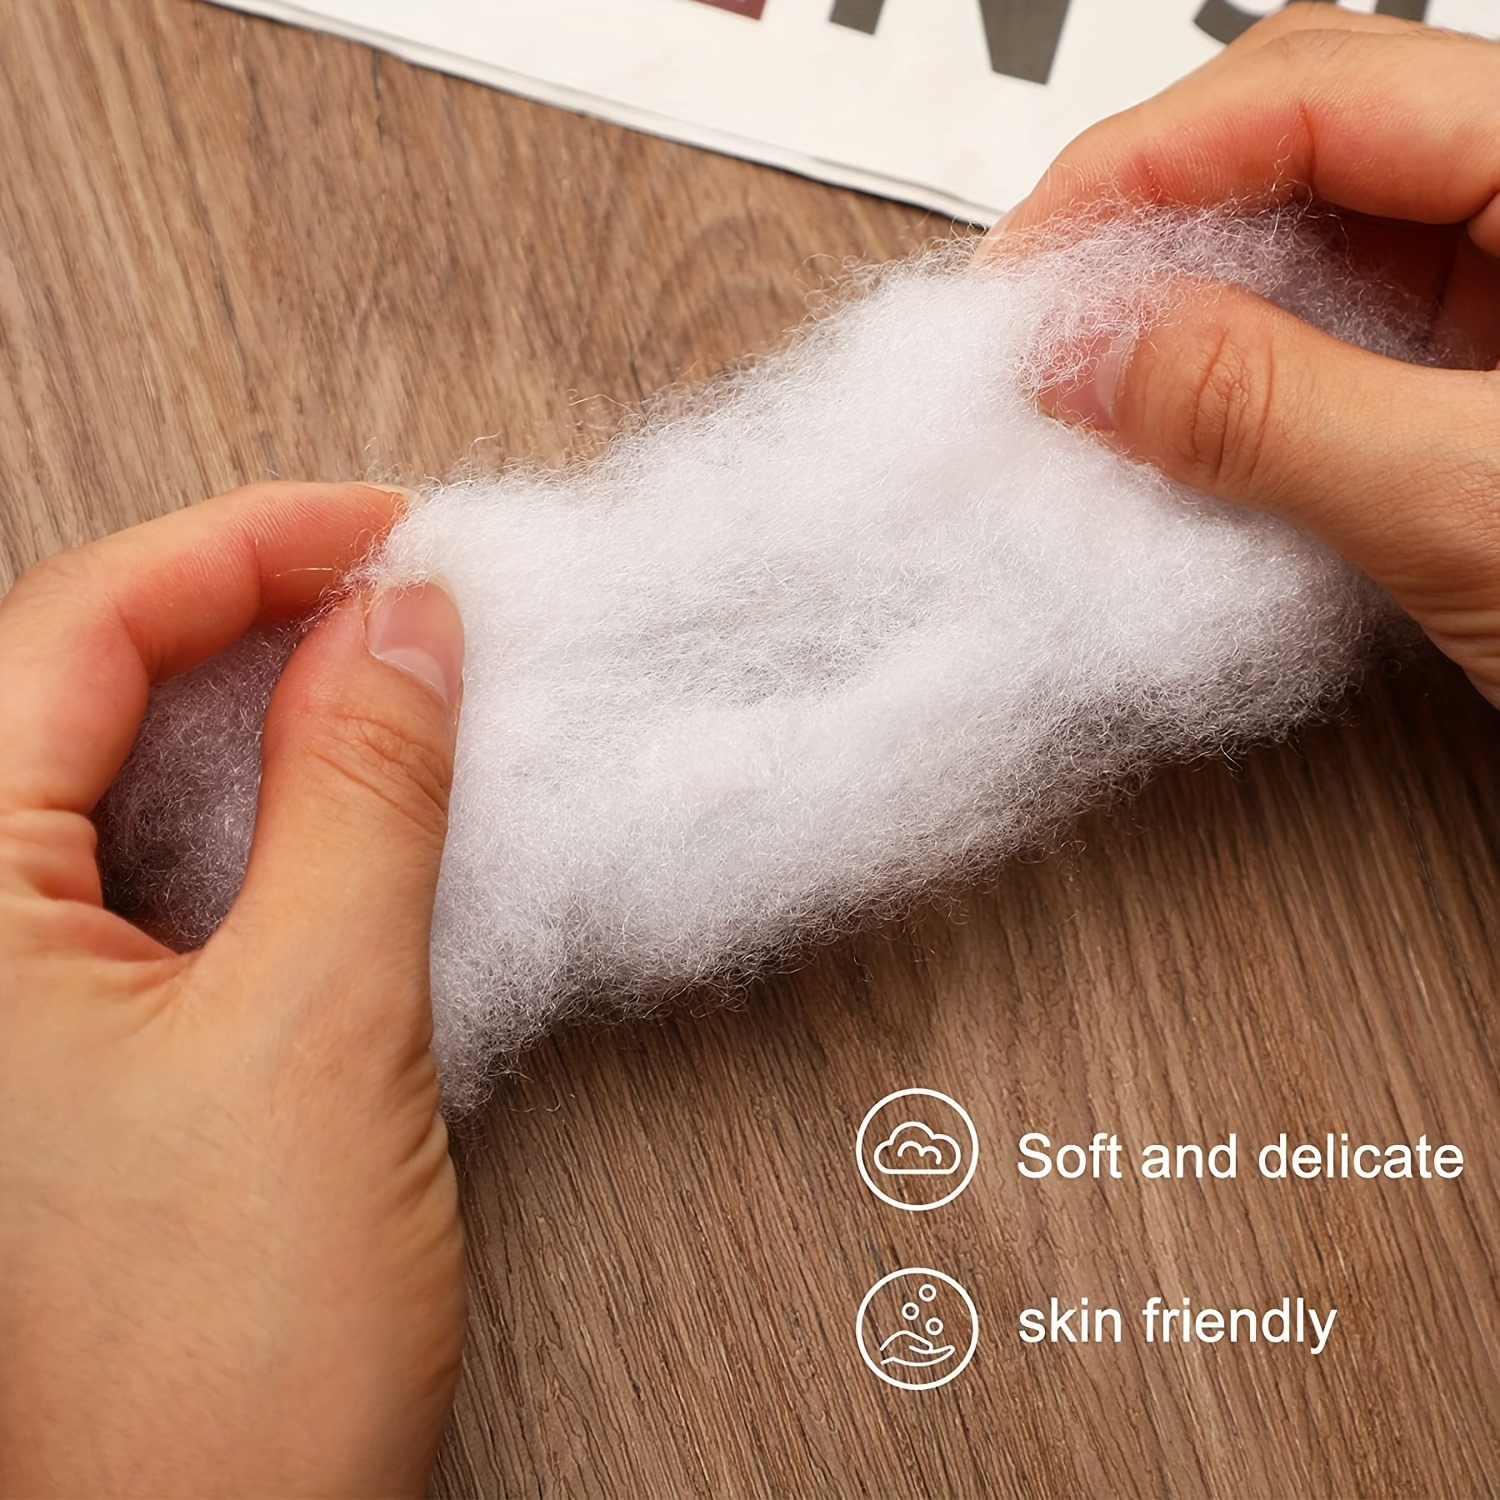 White Polyester Fiber Fill, Fluff Stuffing High Resilience Fill Fiber,  Stuffing Fiber Filling Material For Stuffed Animals Pillow Cushion Pouf  Quilts Paddings Homemade Essentials, Home Decor Supplies - Temu